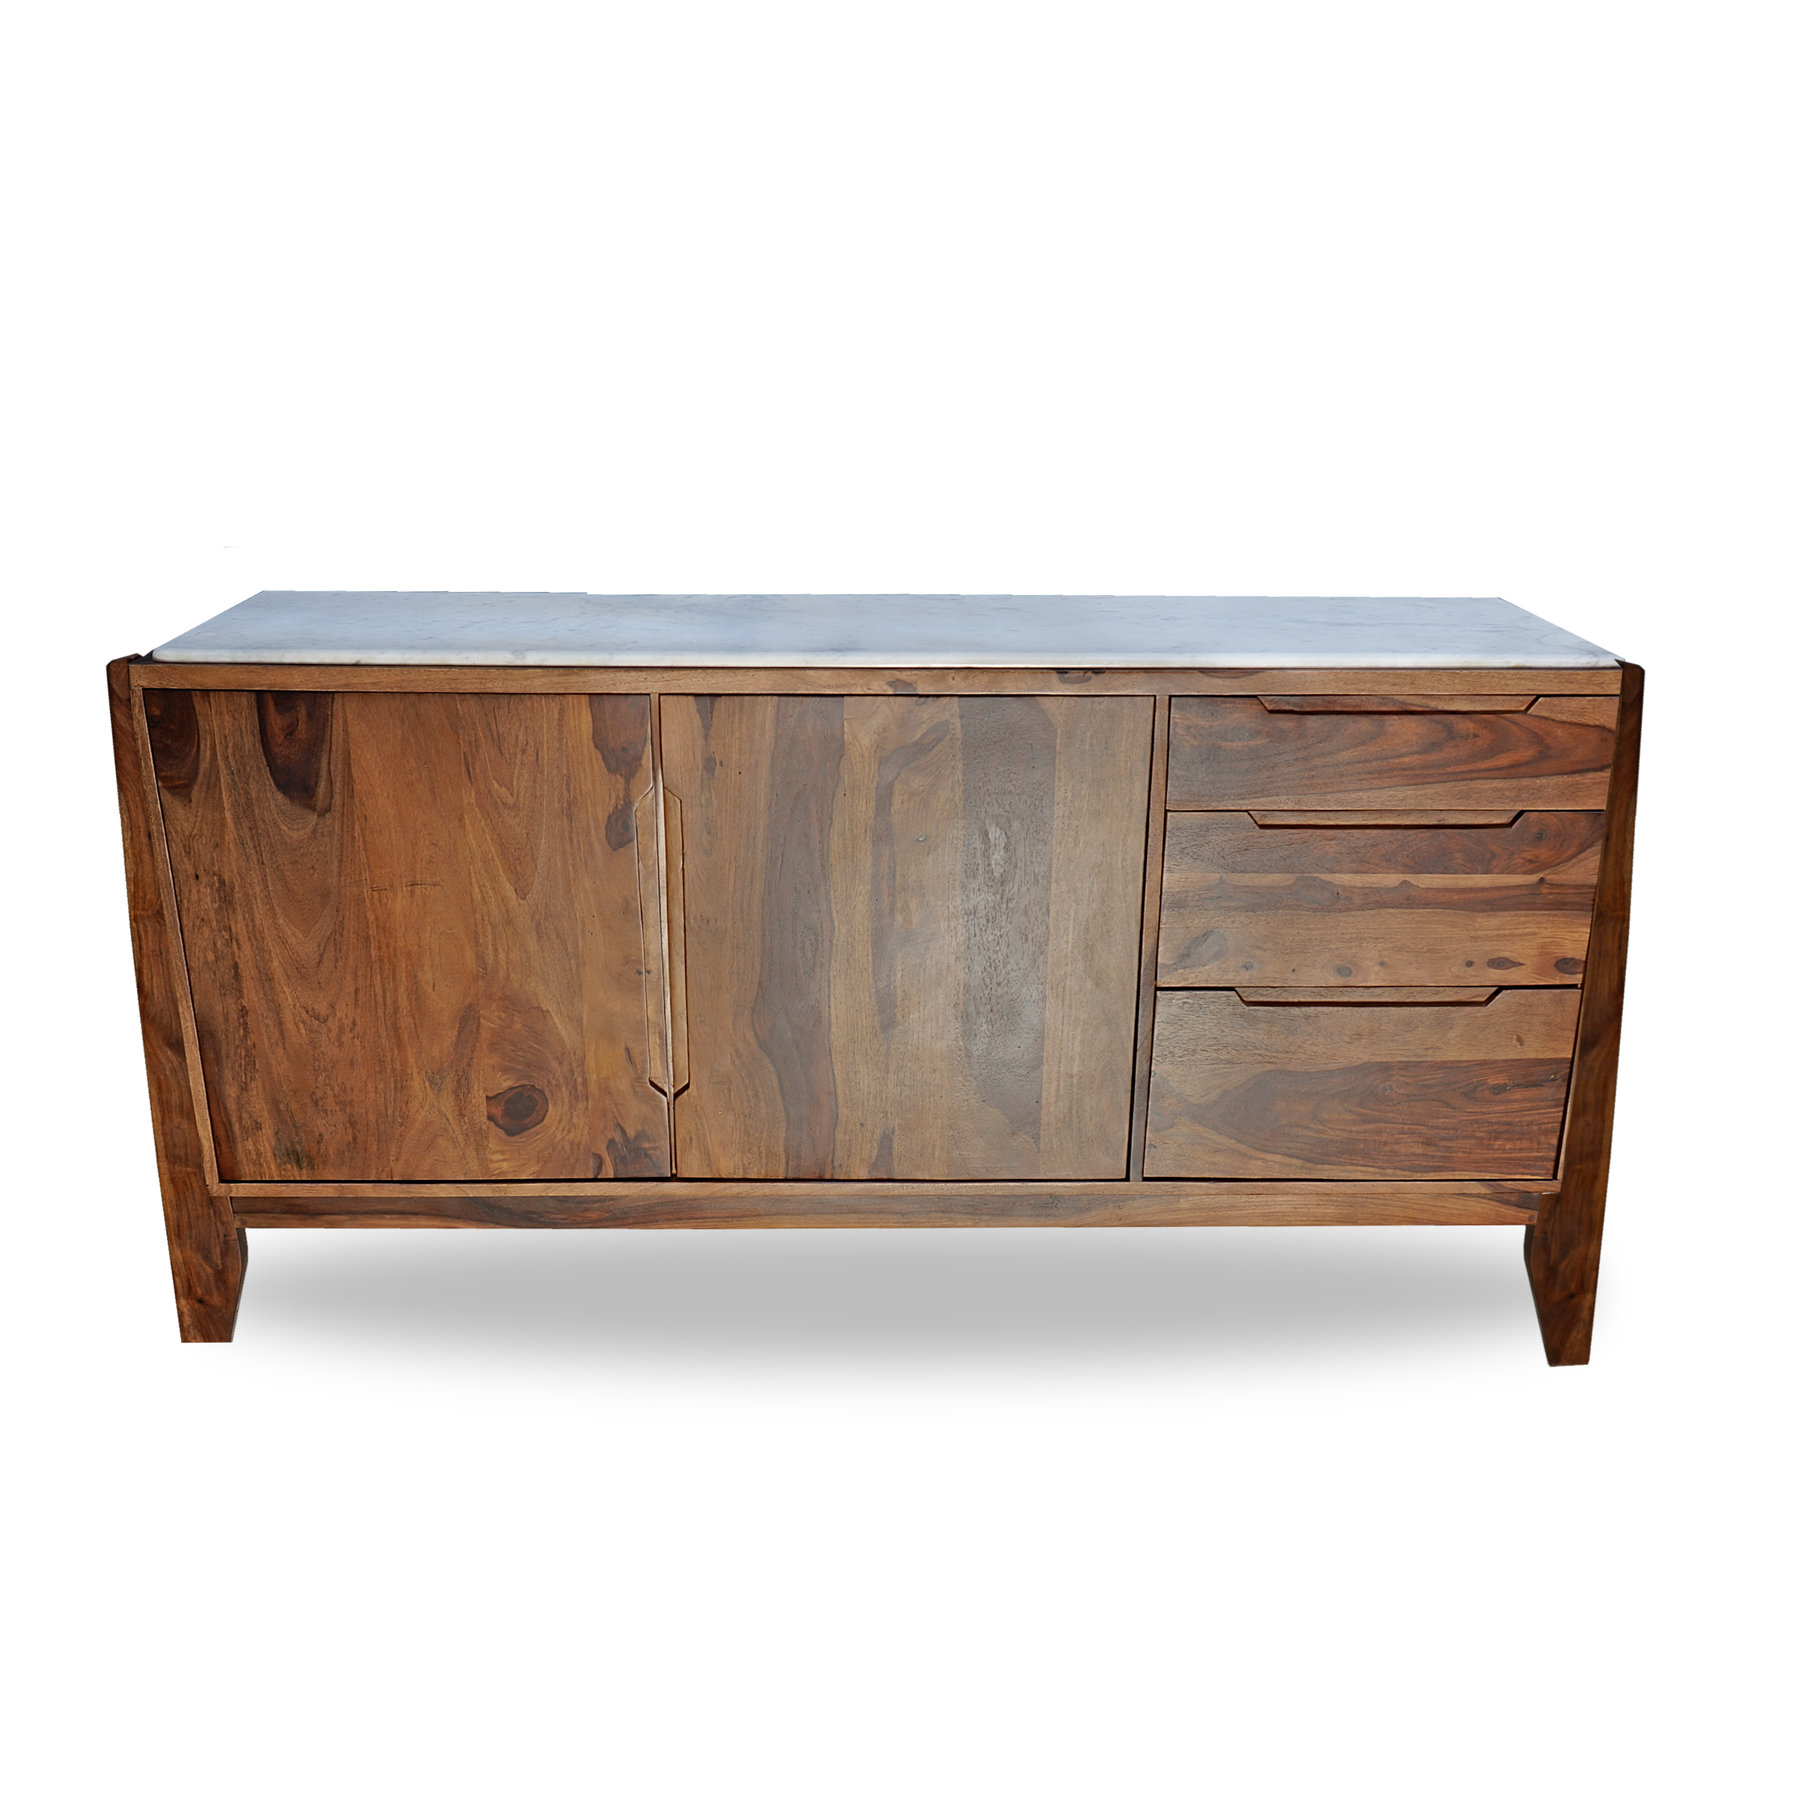 Galatea Marble Sideboard - Wooden Sideboard with 2 Doors and 3 Drawers | 145x45x80 cm